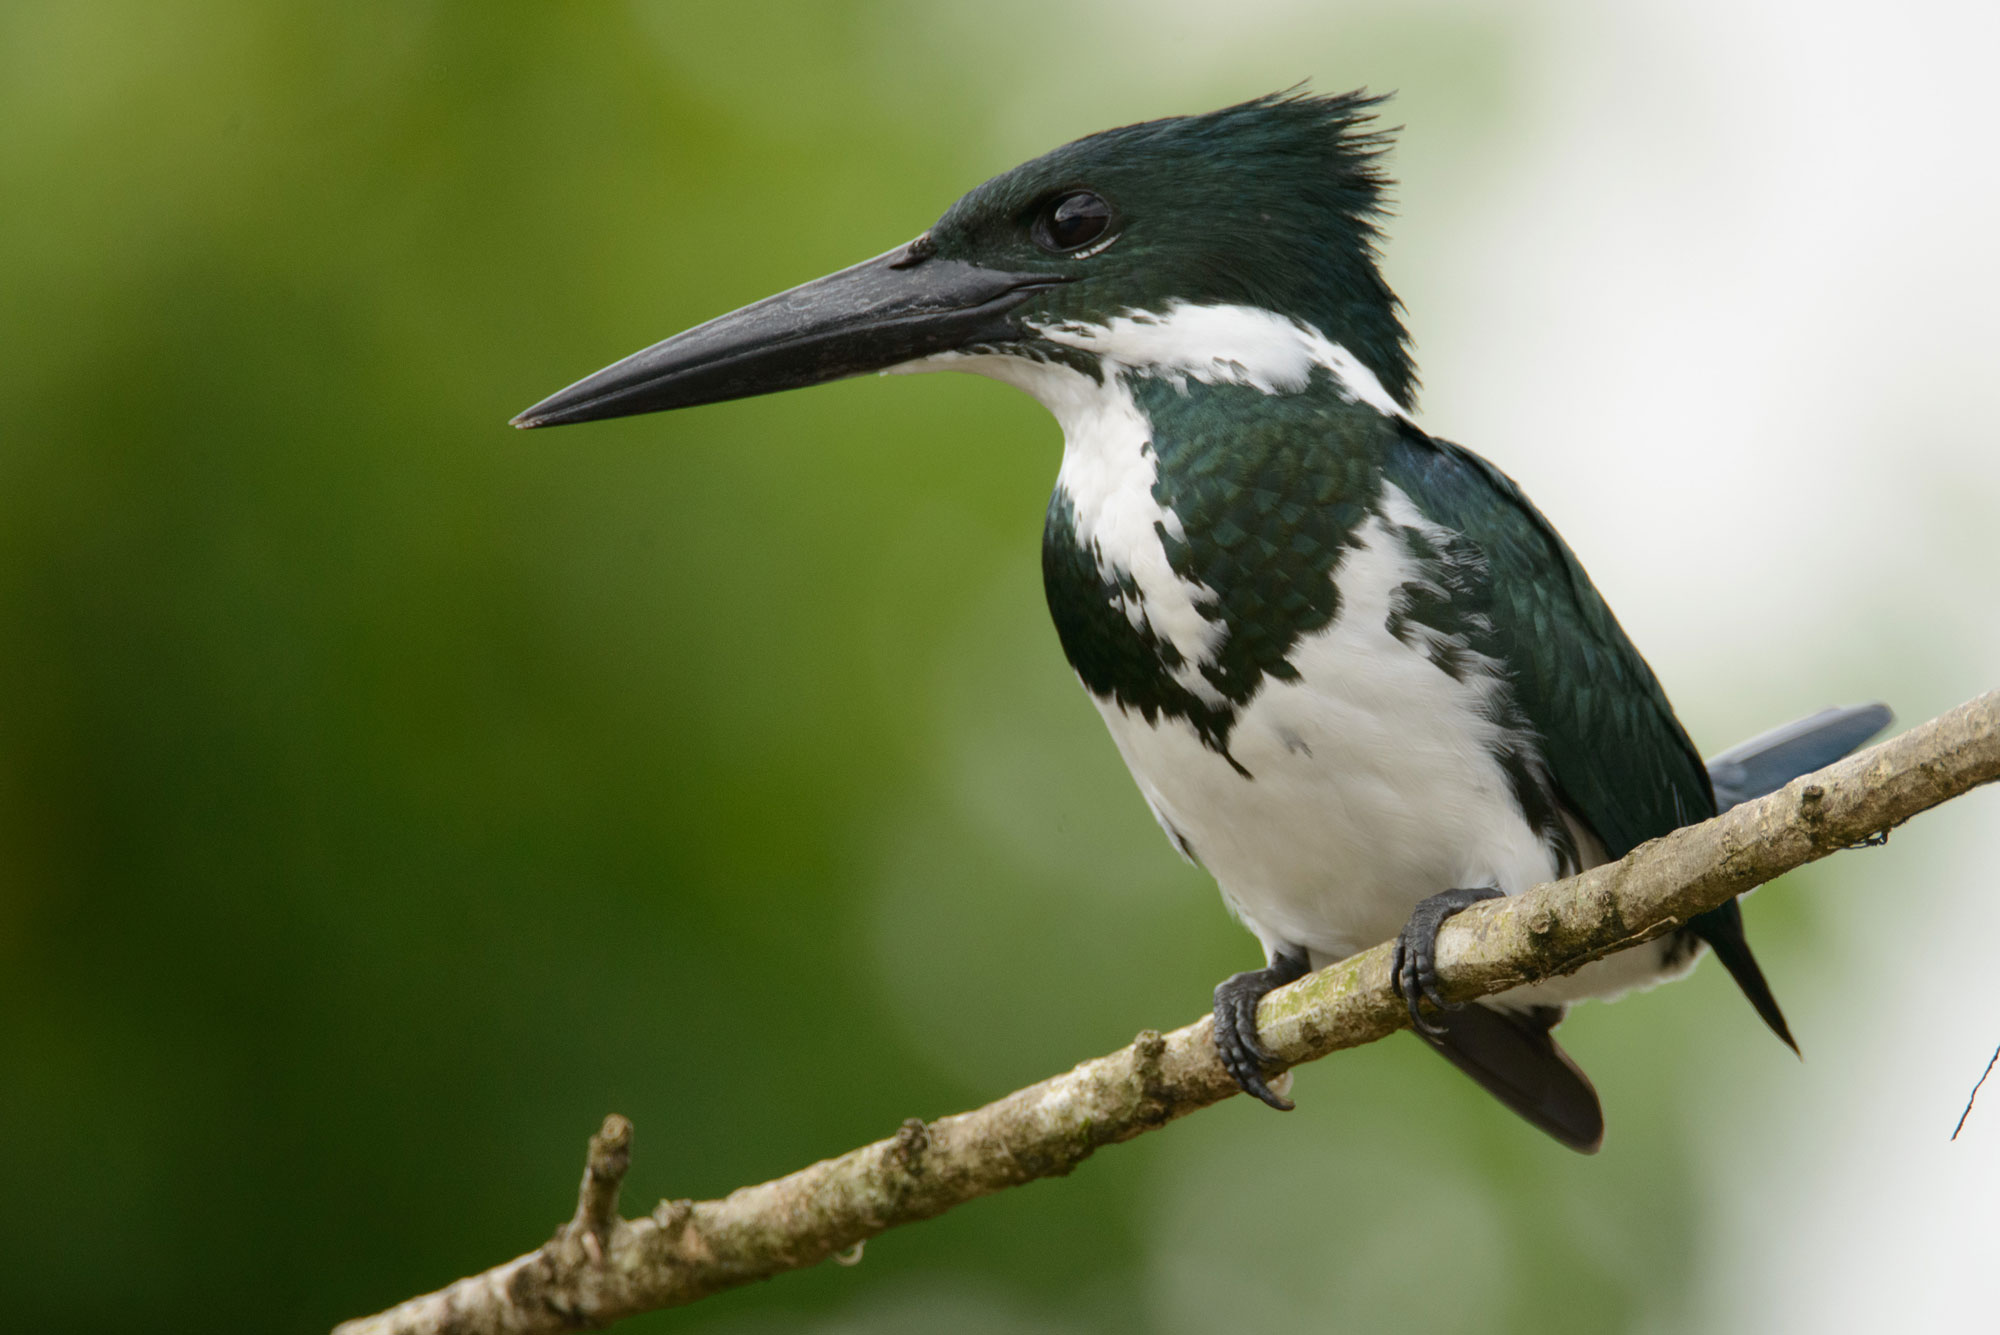 Photograph of a female Amazon kingfisher perched on a thin branch. The photo shows a green and white bird with a relatively large head and a long black beak. The bird's head and wings are green, with green patches on its upper breast. Its throat, most its breast, and its neck are white.